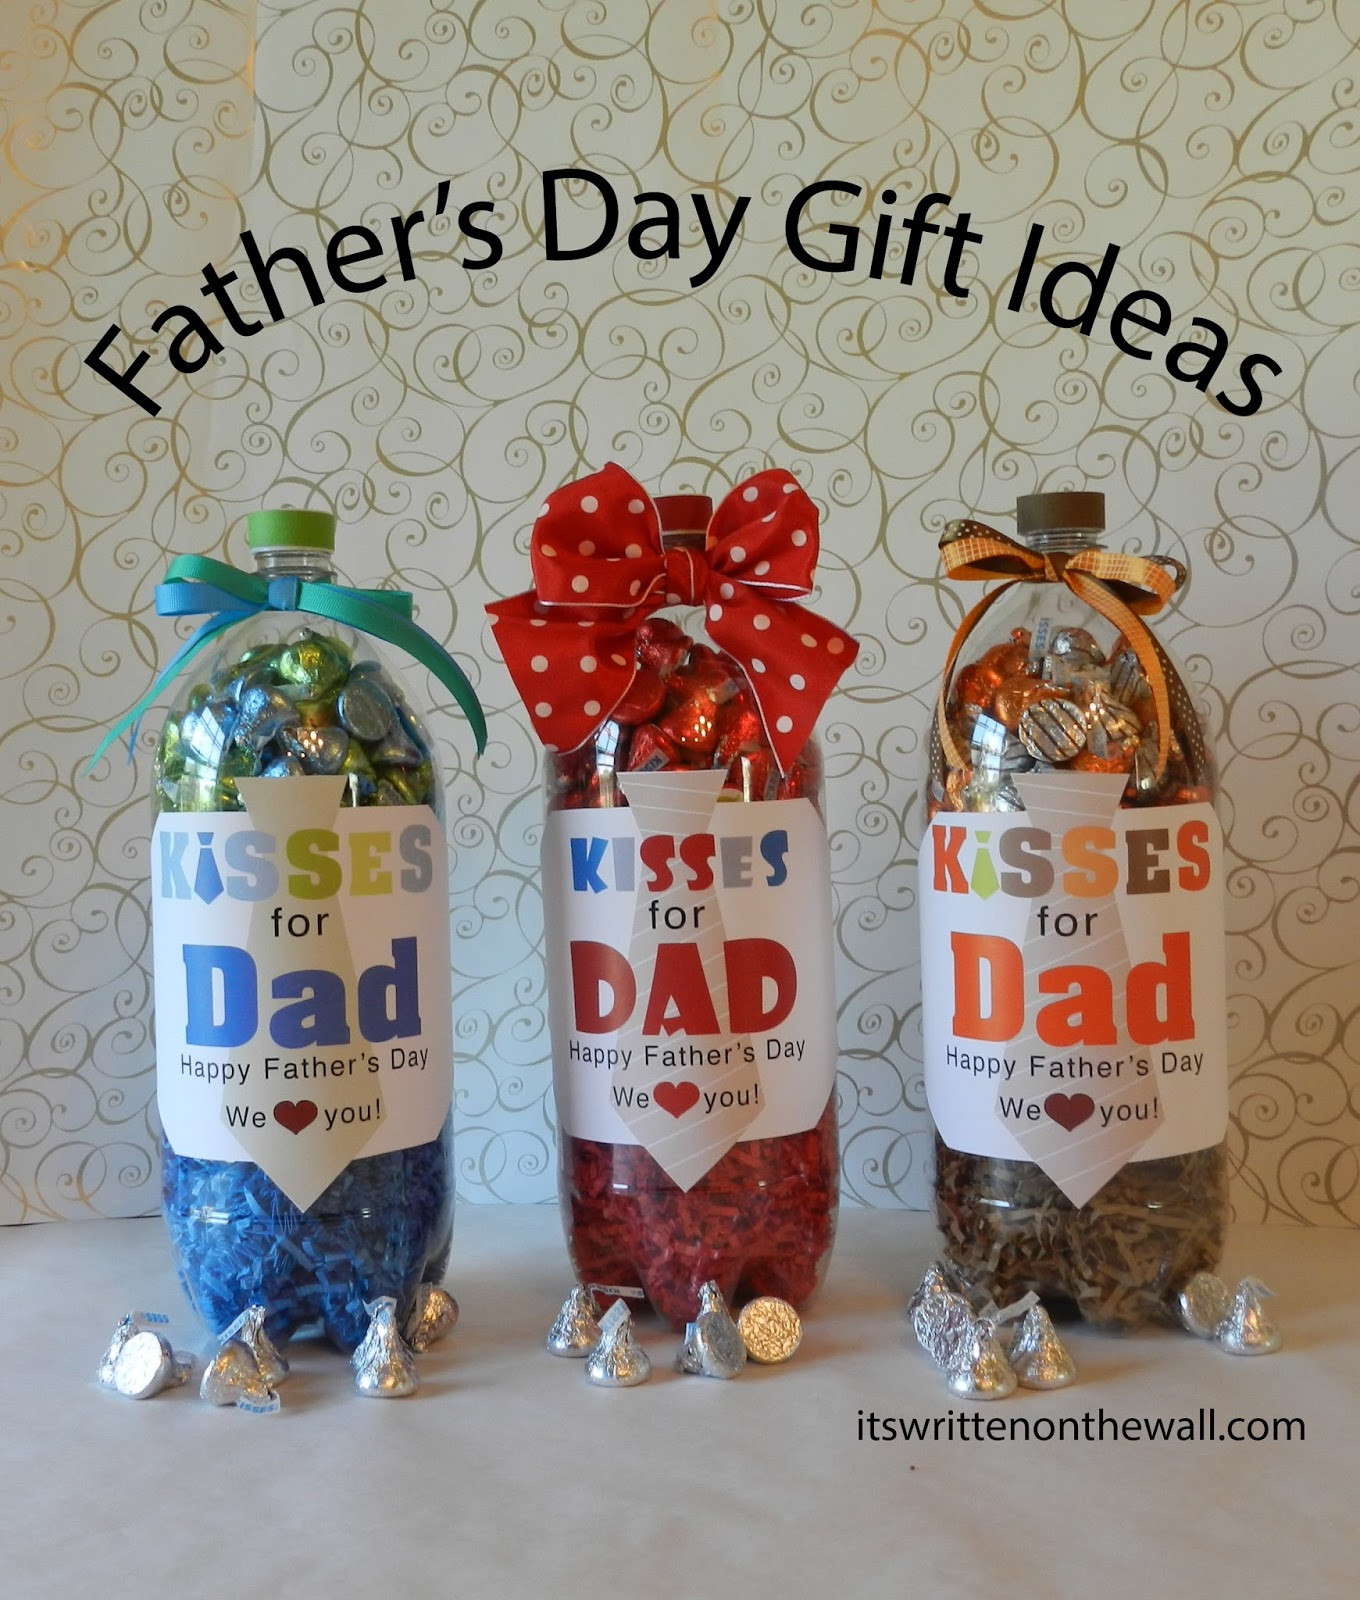 Top Fathers Day Gift Ideas
 It s Written on the Wall Fathers Day Gift Ideas For the